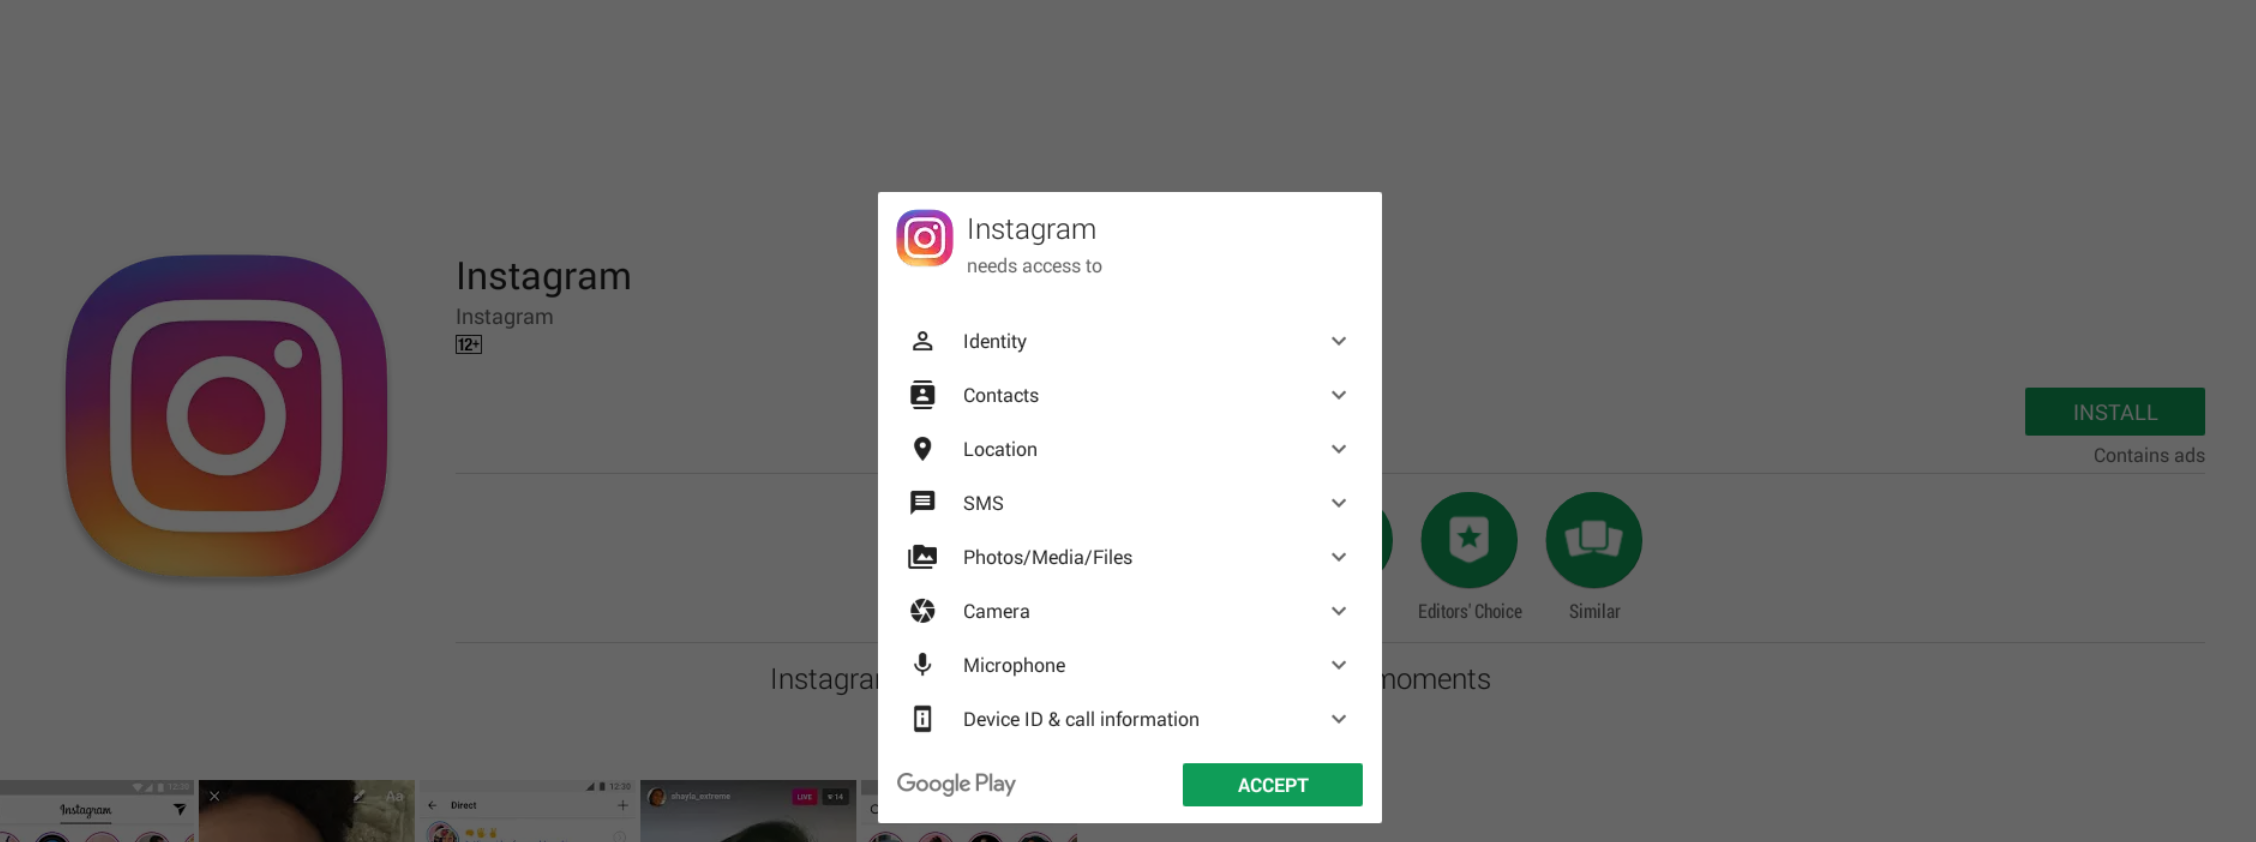 access instagram without a phone